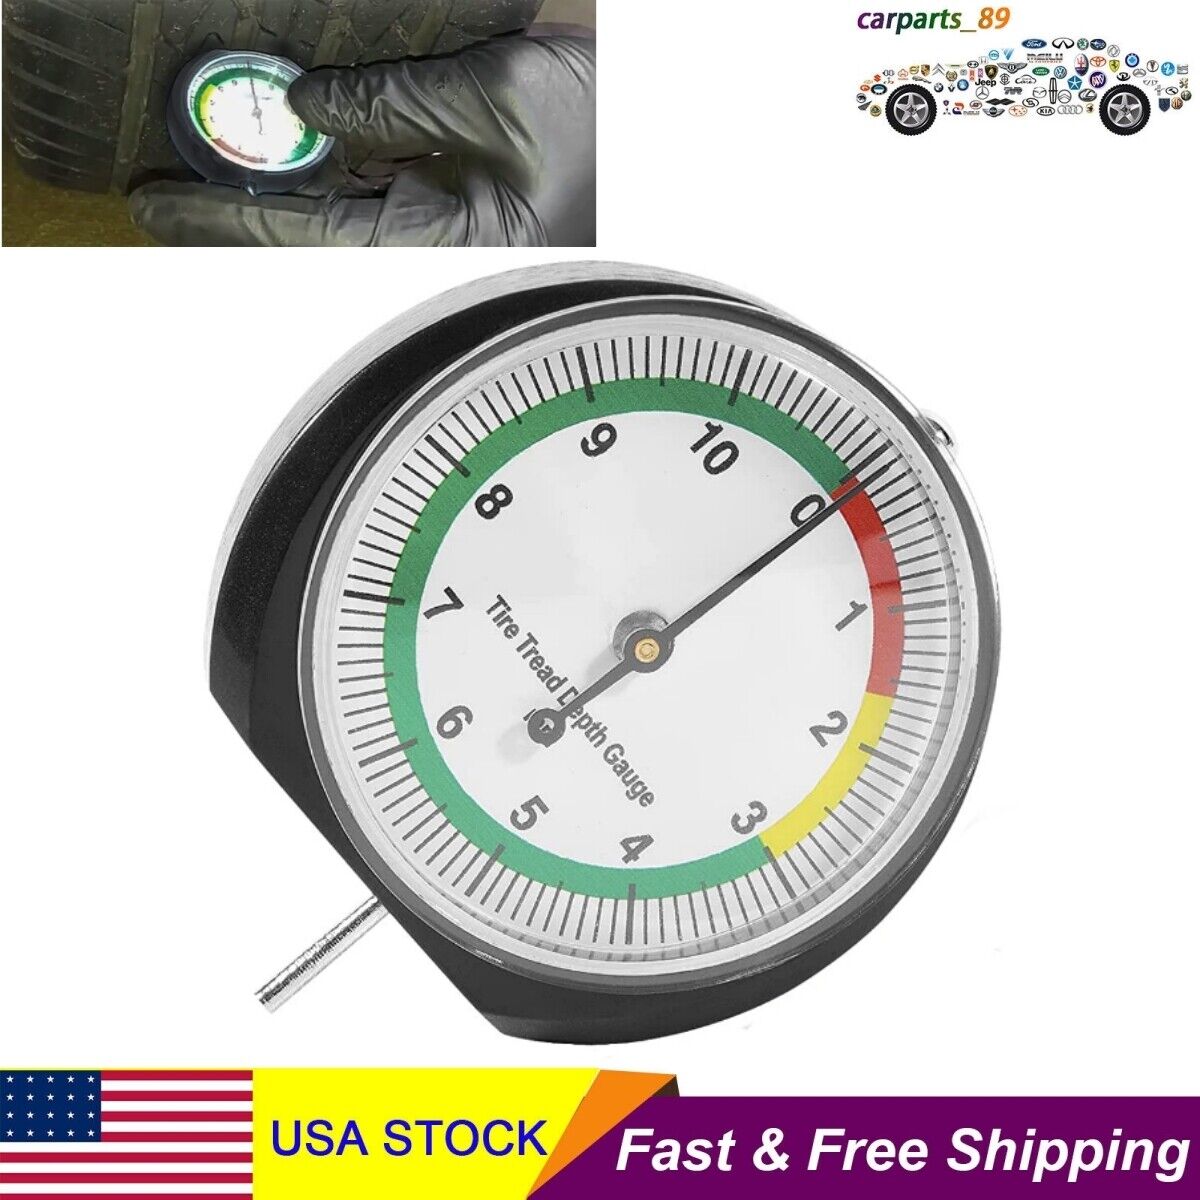 Professional Dial Type Tire Tread Depth Gauge 0-11mm For Motorcycle Car Truck 